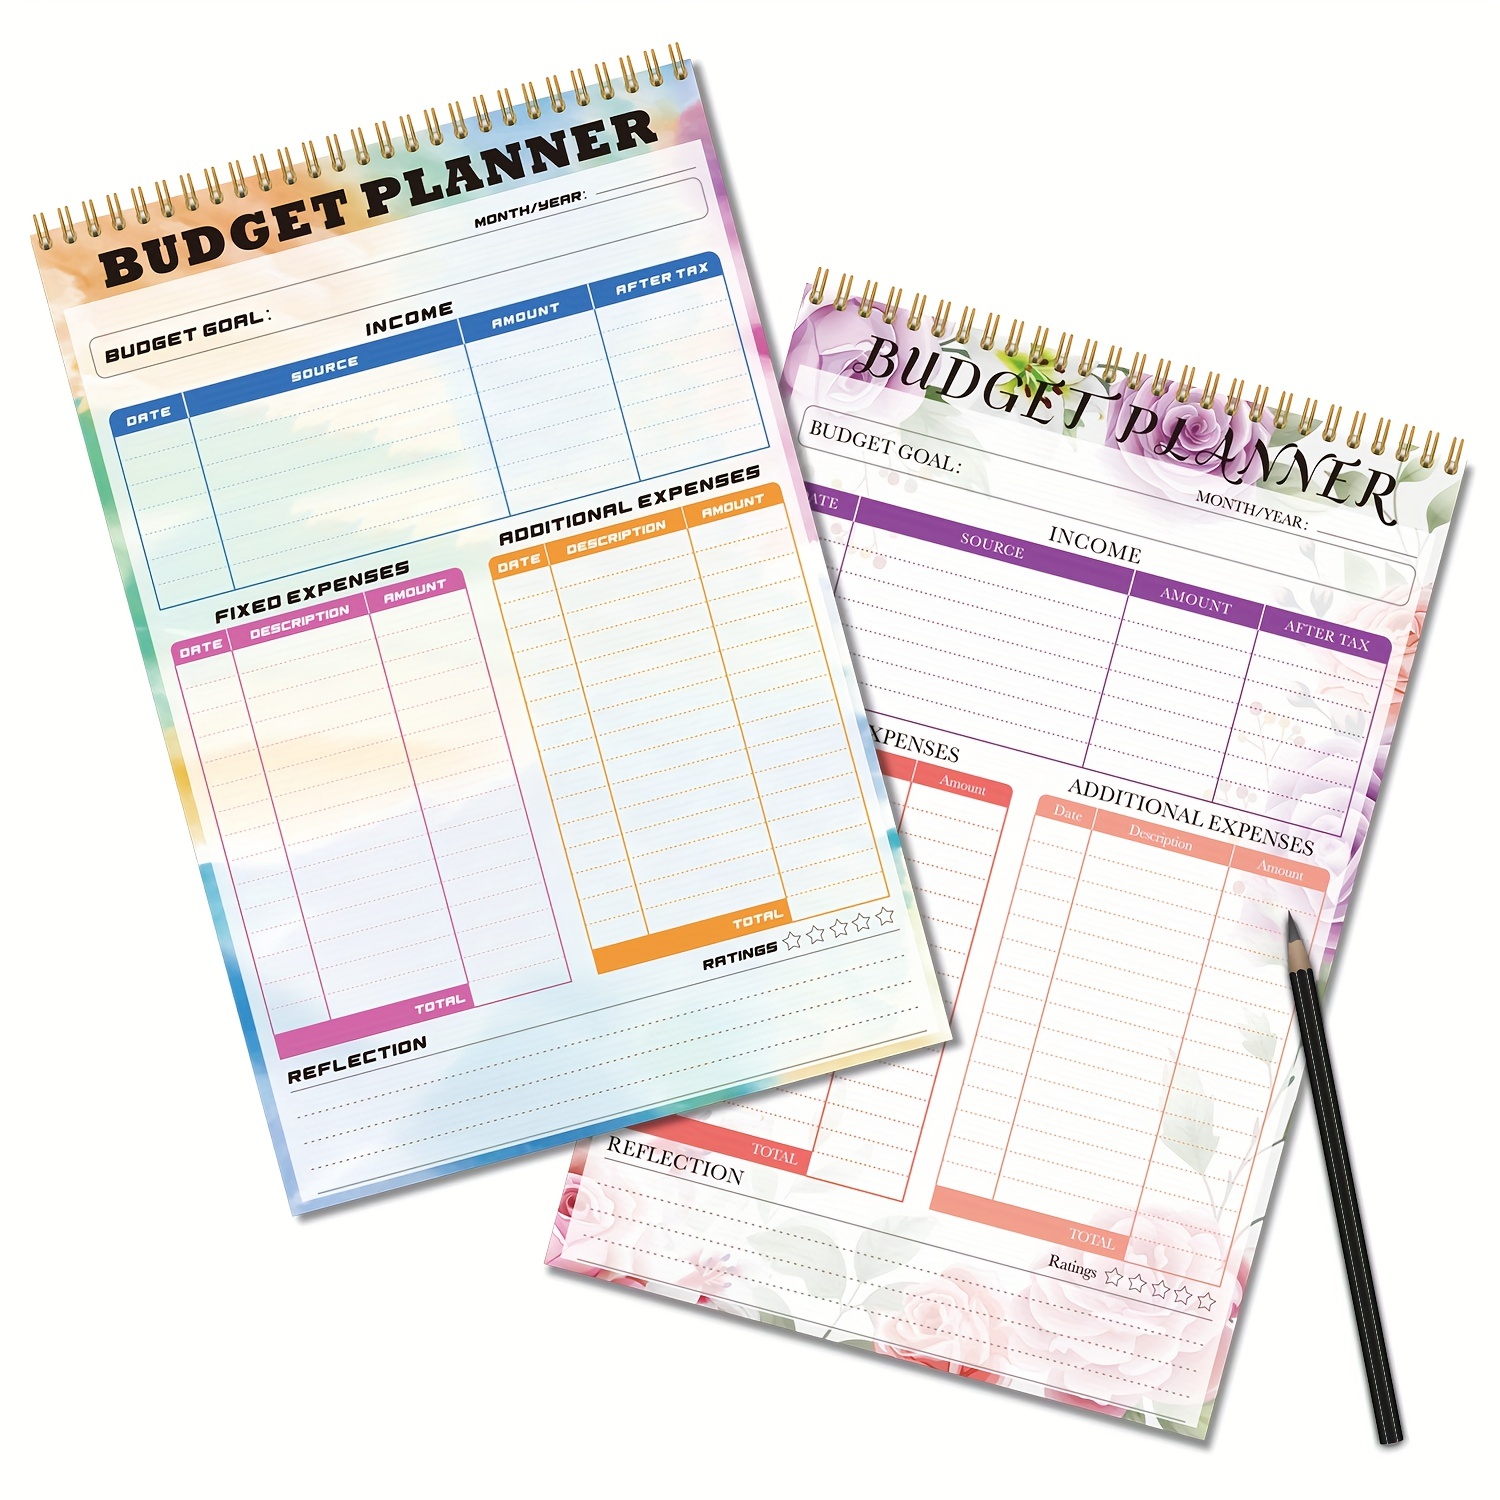 Budget Planner Notepad - Undated Expense Tracker Notebook. Monthly  Budgeting Journal, Finance Planner & Accounts Book to Take Control of Your